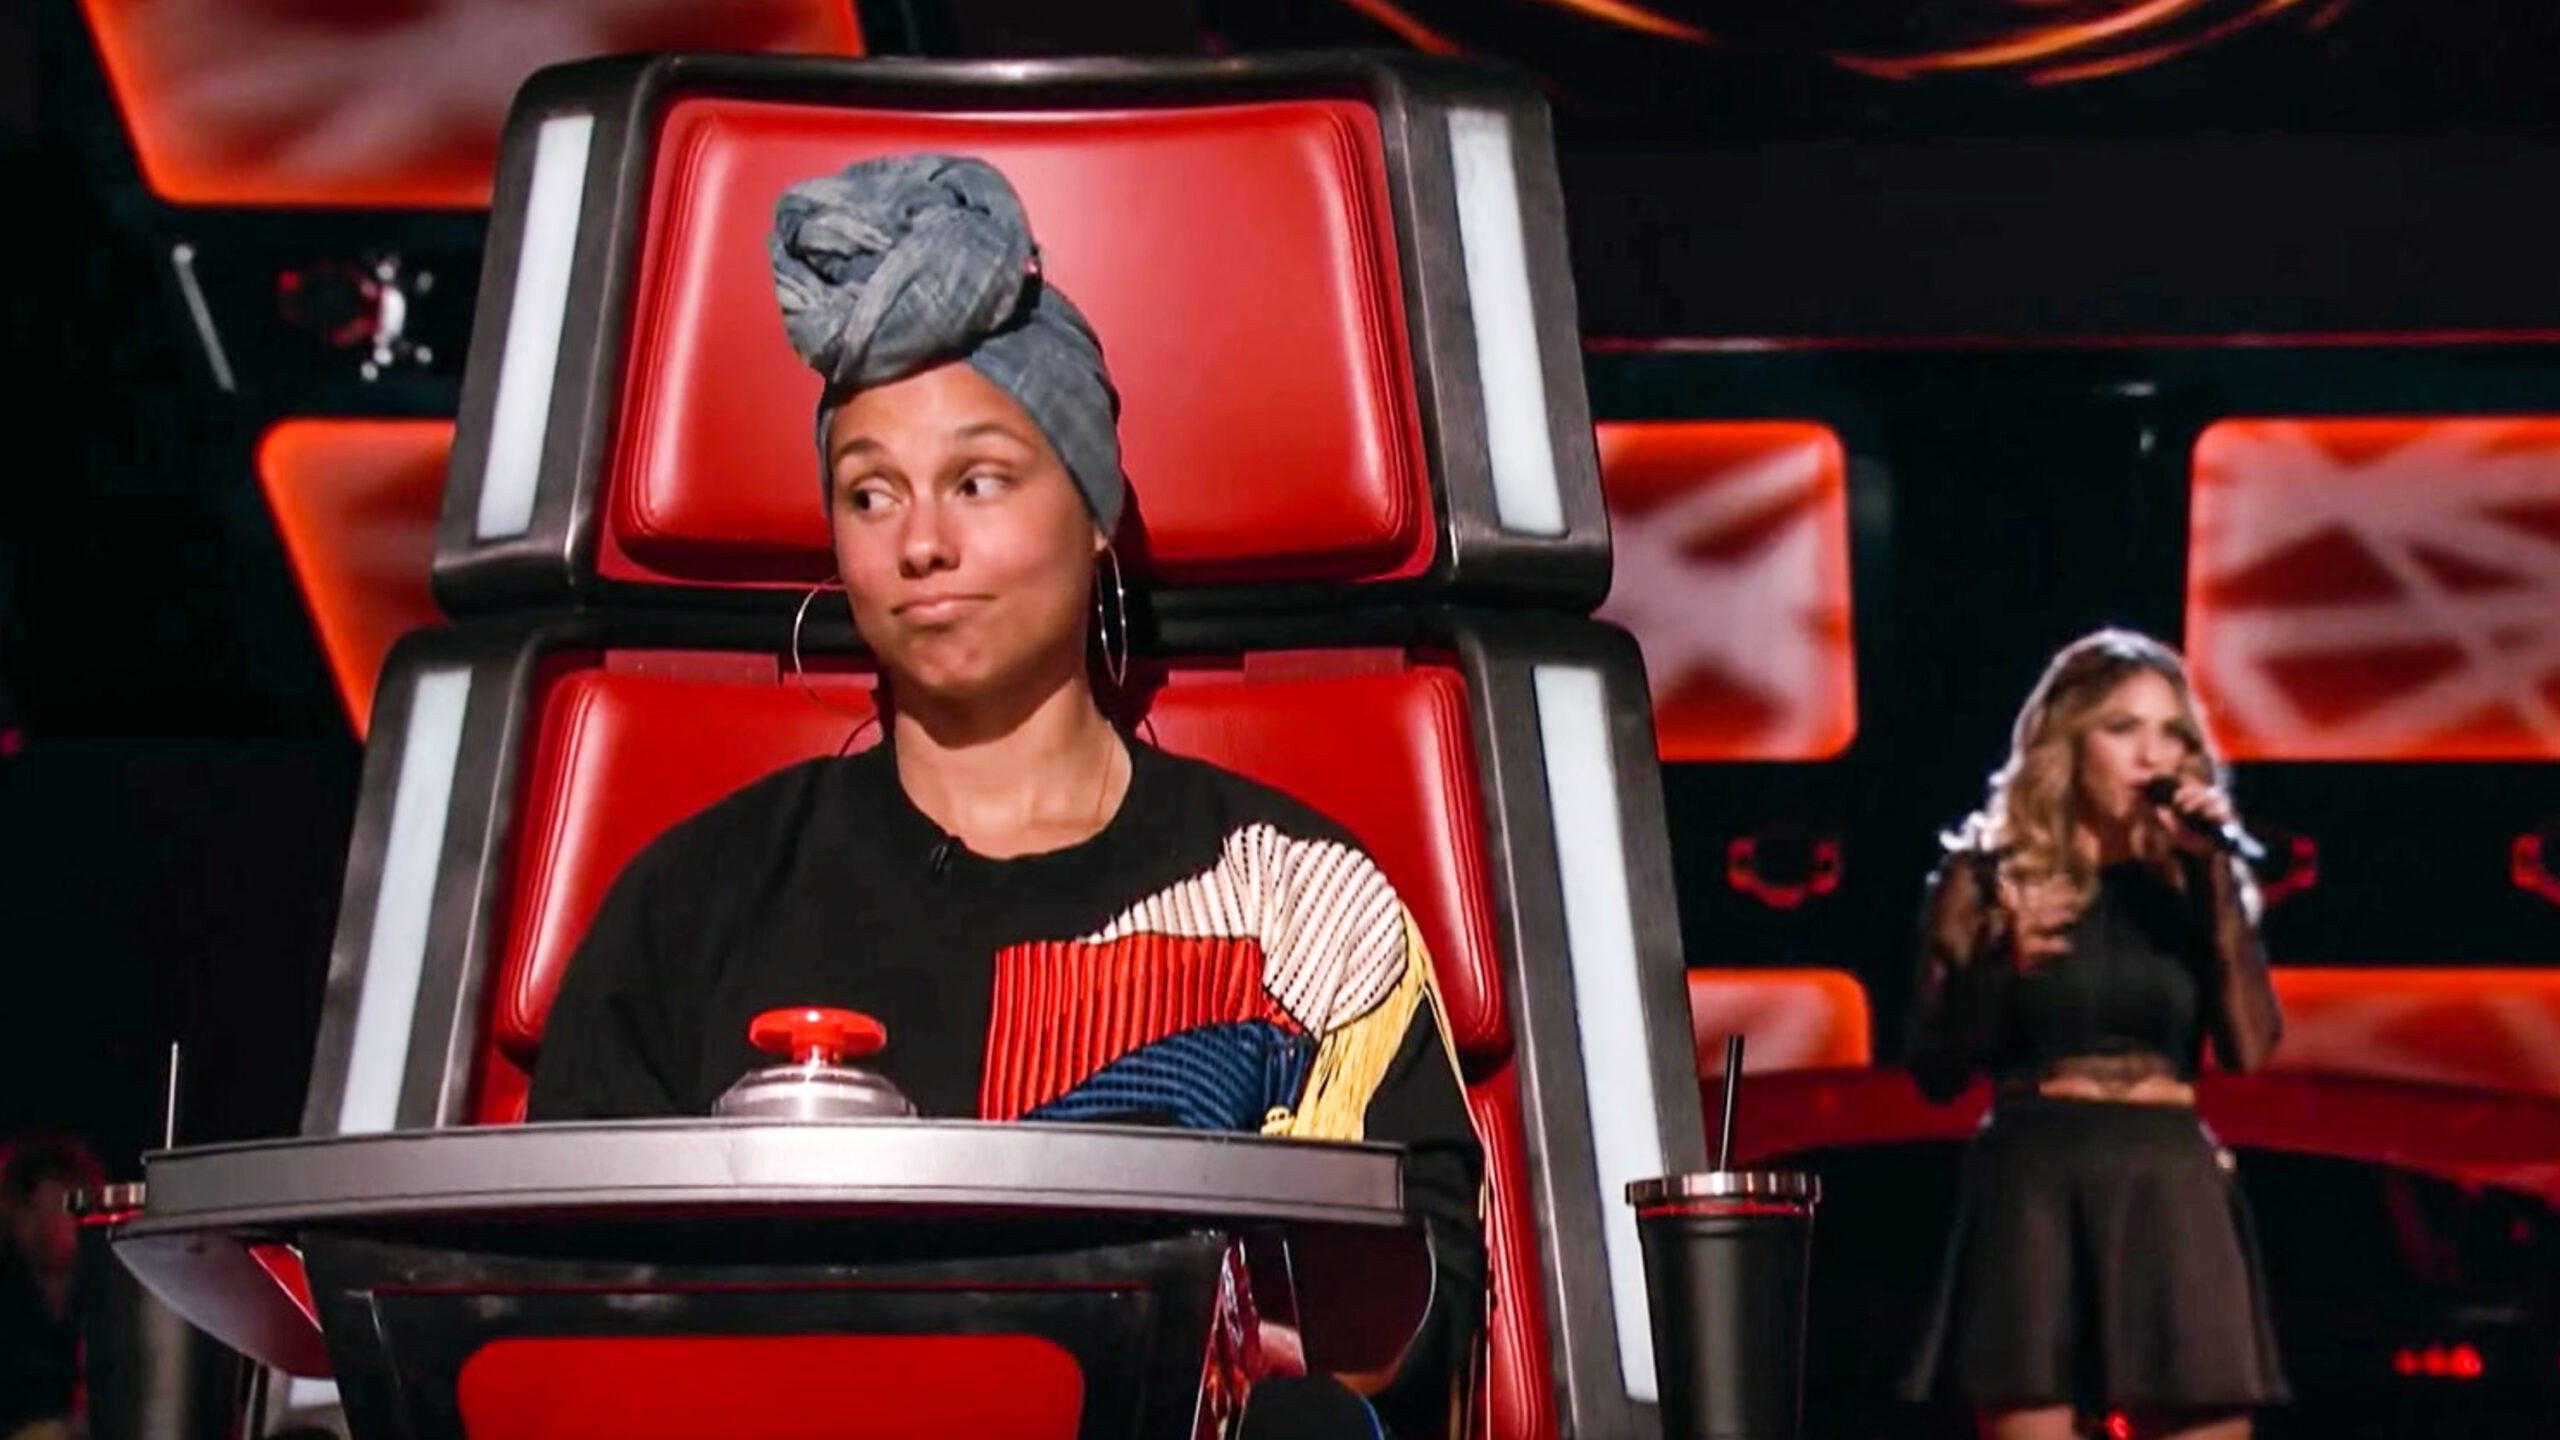 WATCH: Alicia Keys turns for ‘Voice’ contestant who sings ‘If I Ain’t Got You’